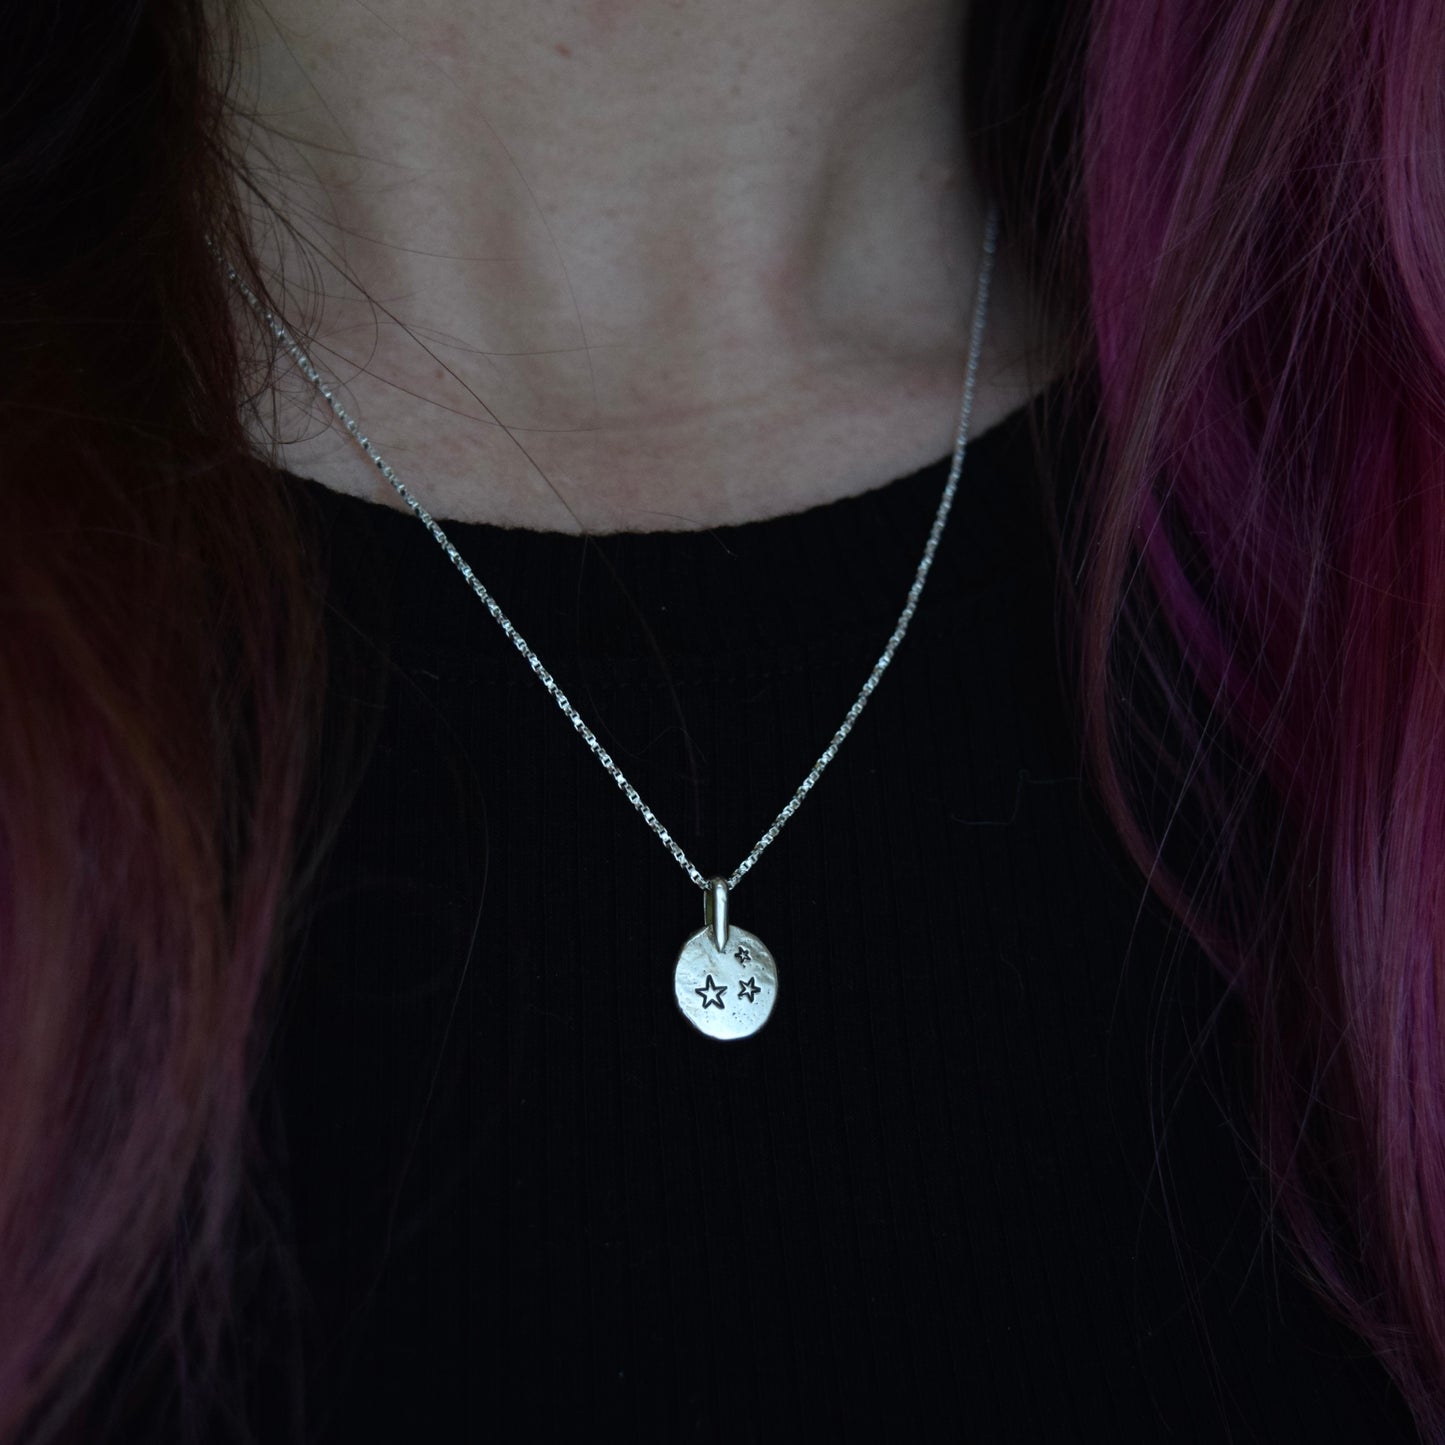 Three Star Coin Necklace